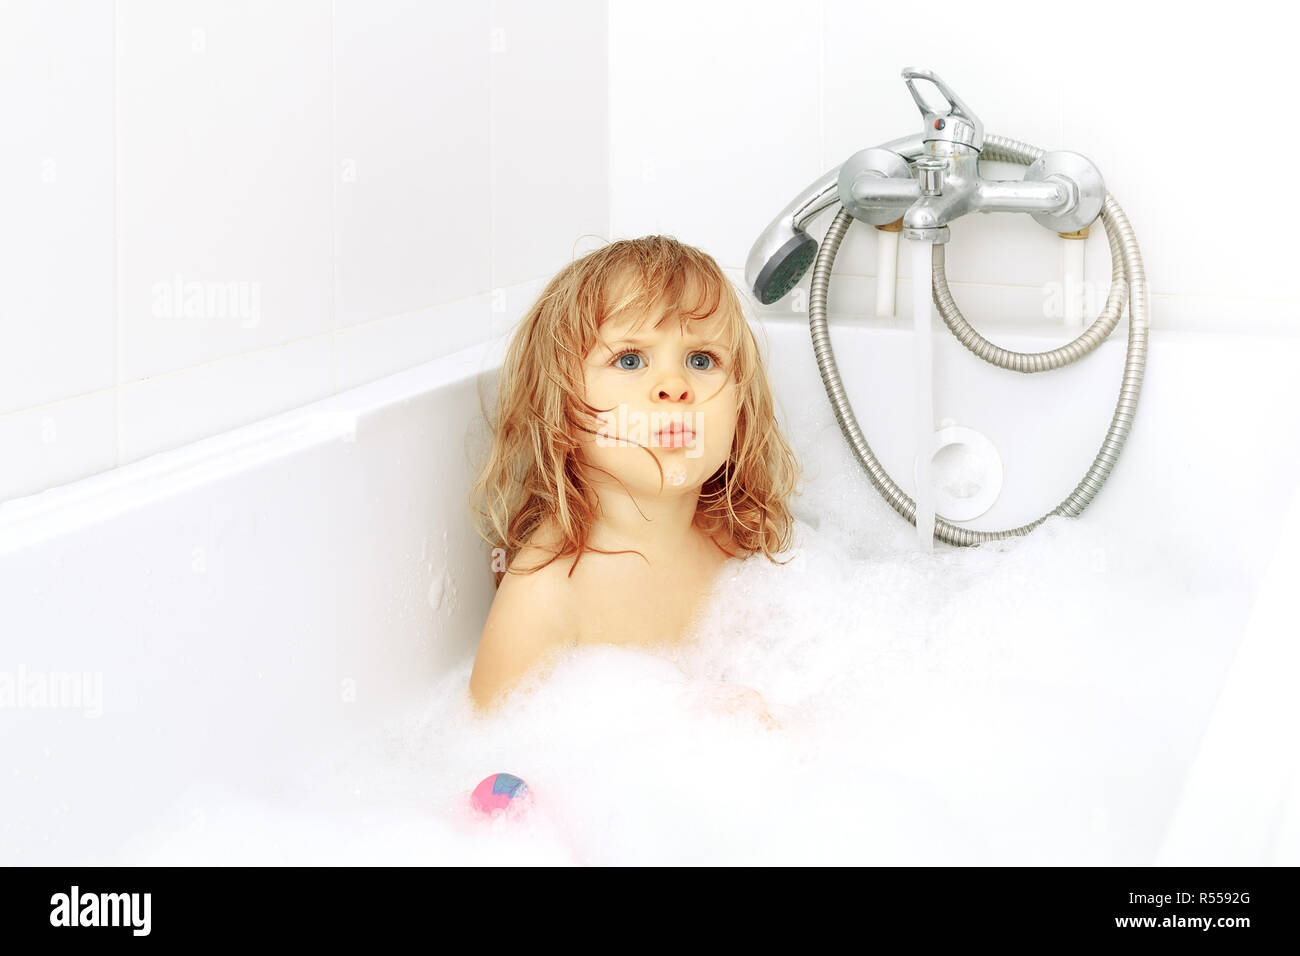 Serious blue-eyed toddler in the white bath. Infant washing and bathing. Hygiene and health care. Lips folded tube, eyebrows furrowed, looking up Stock Photo